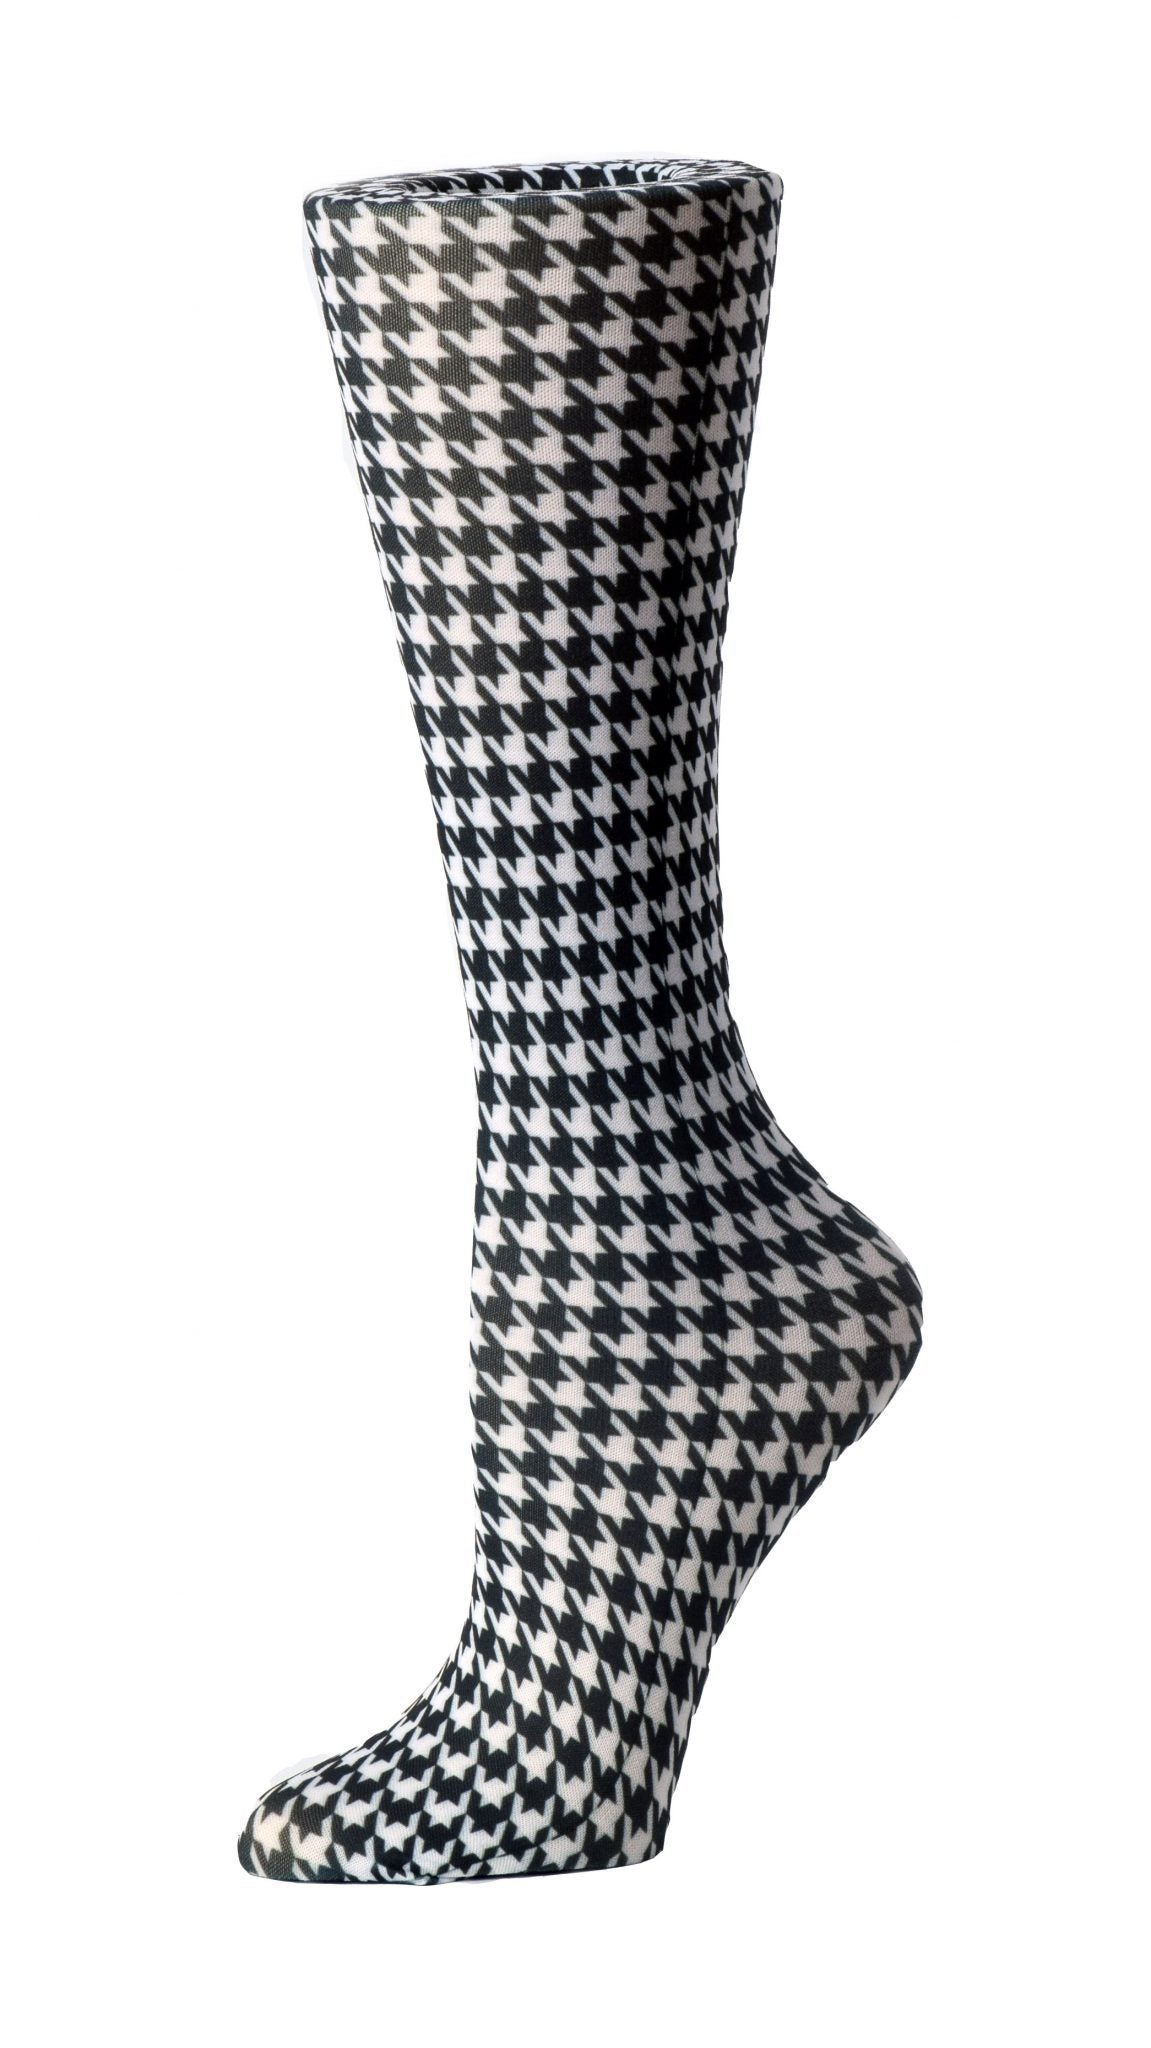 Cutieful Moderate Compression Socks 10-18 MMhg Wide Calf Knit Print Pattern Houndstooth at Parker's Clothing and Shoes.